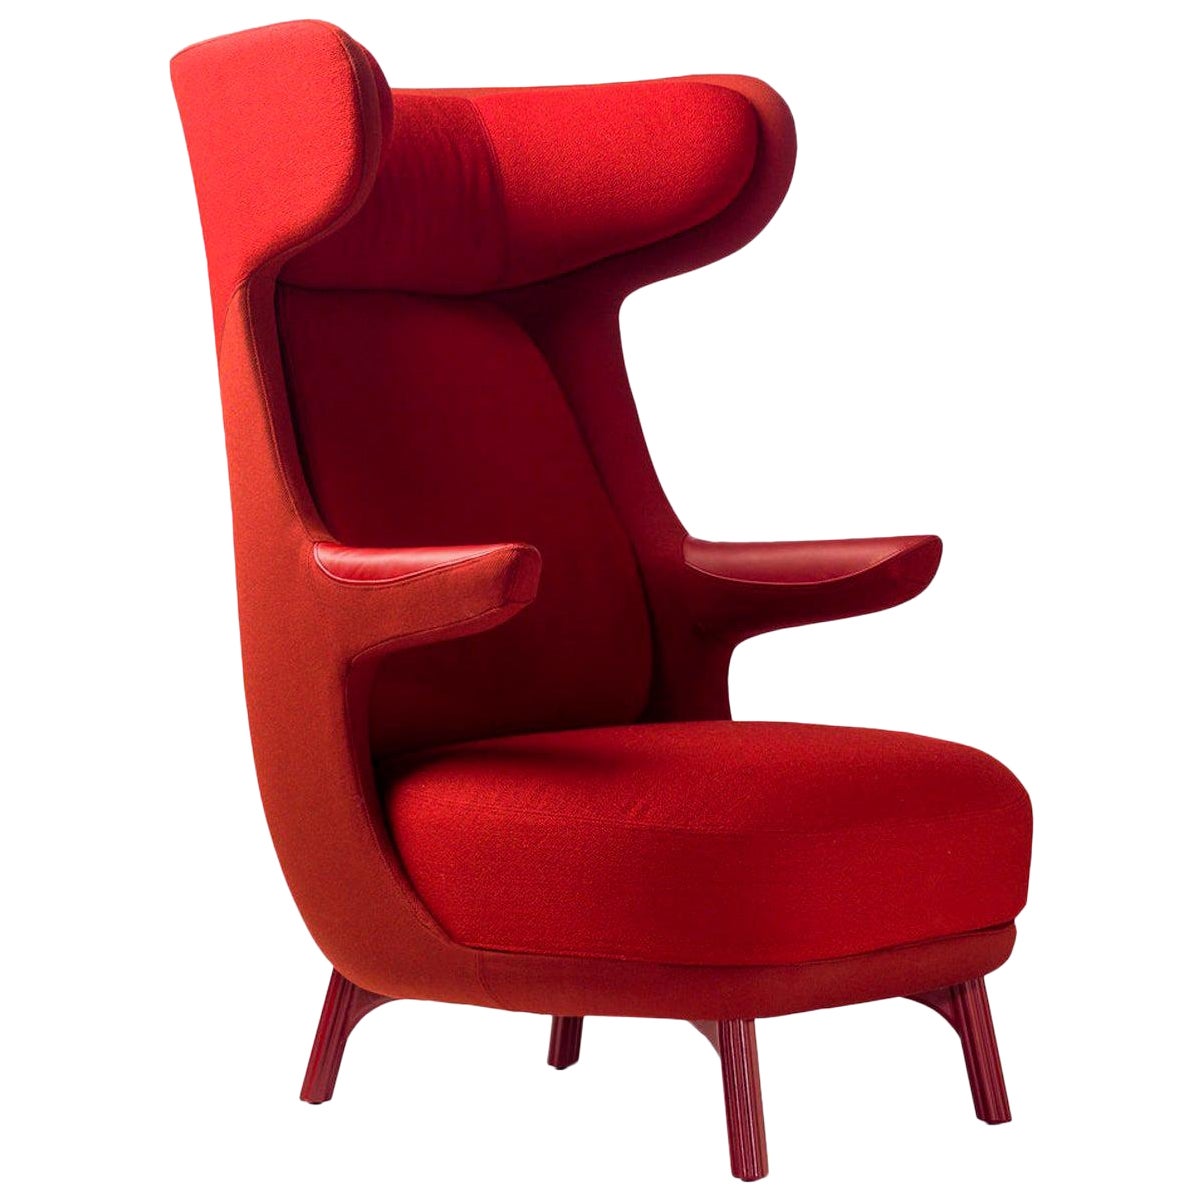 Jaime Hayon, Monocolor Red Fabric Leather Upholstery Dino Armchair  For Sale